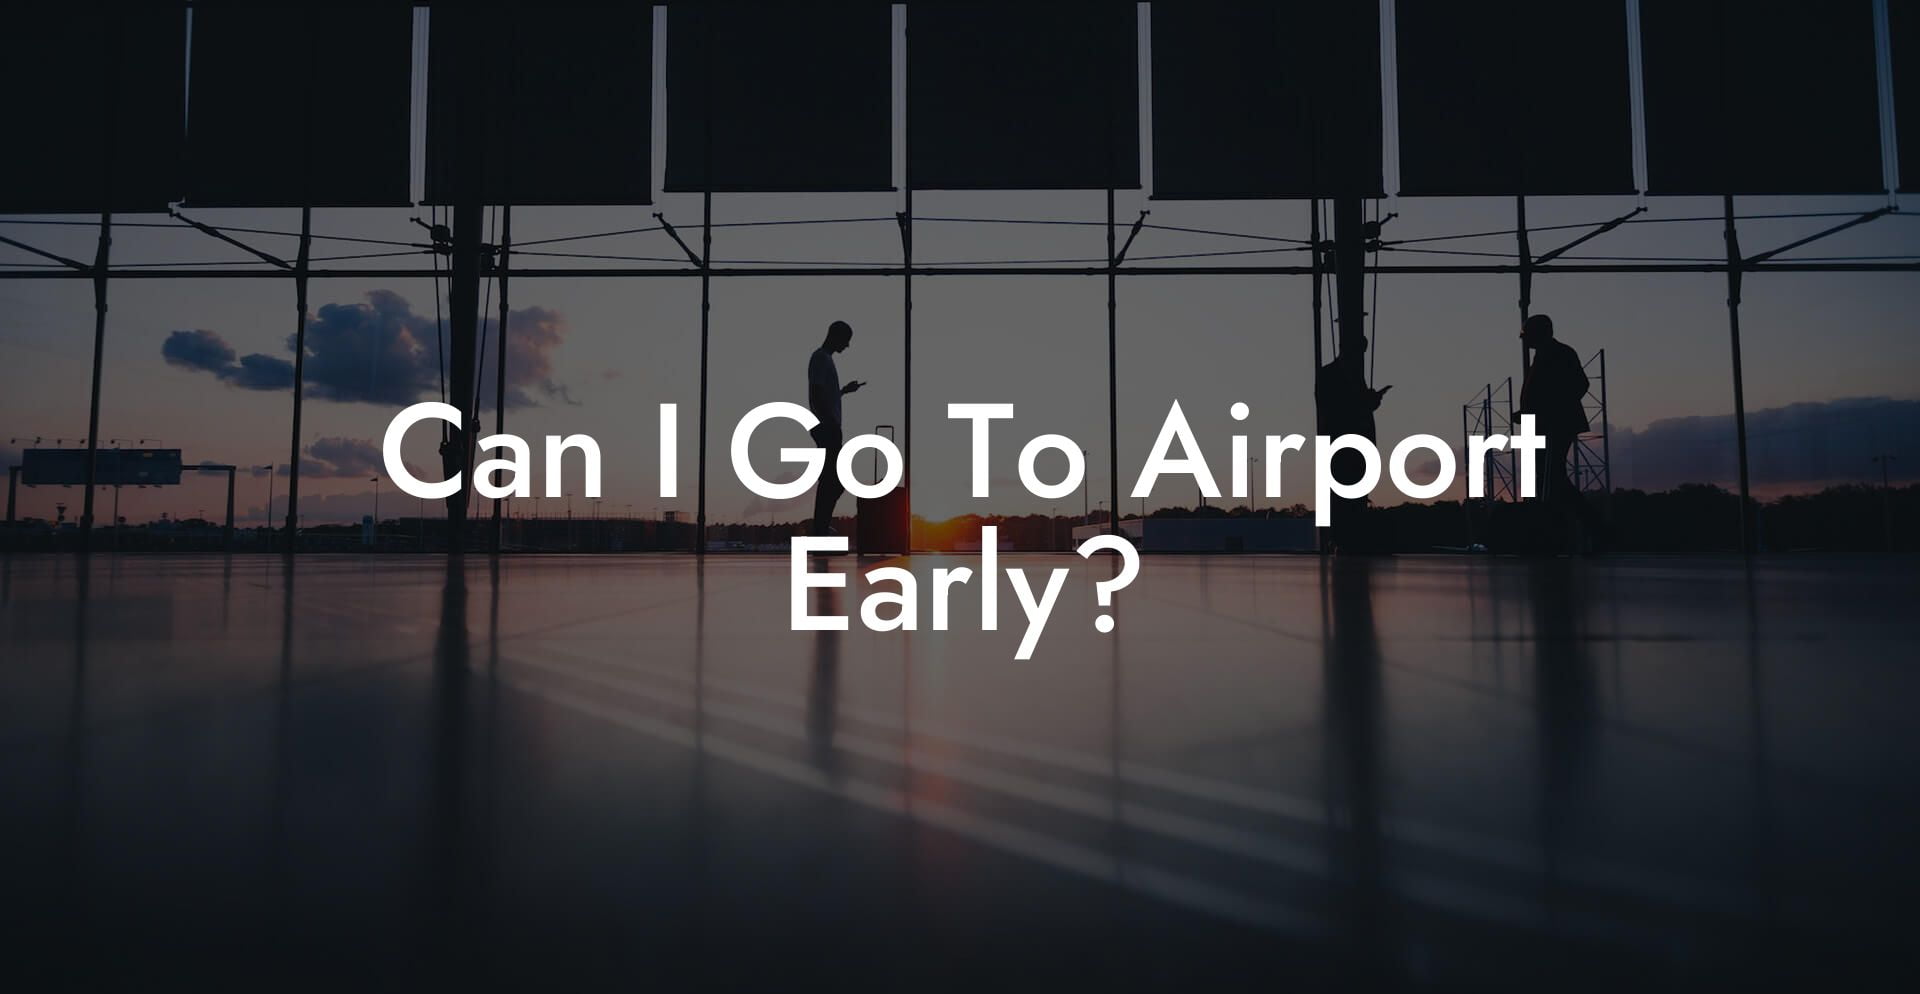 Can I Go To Airport Early?